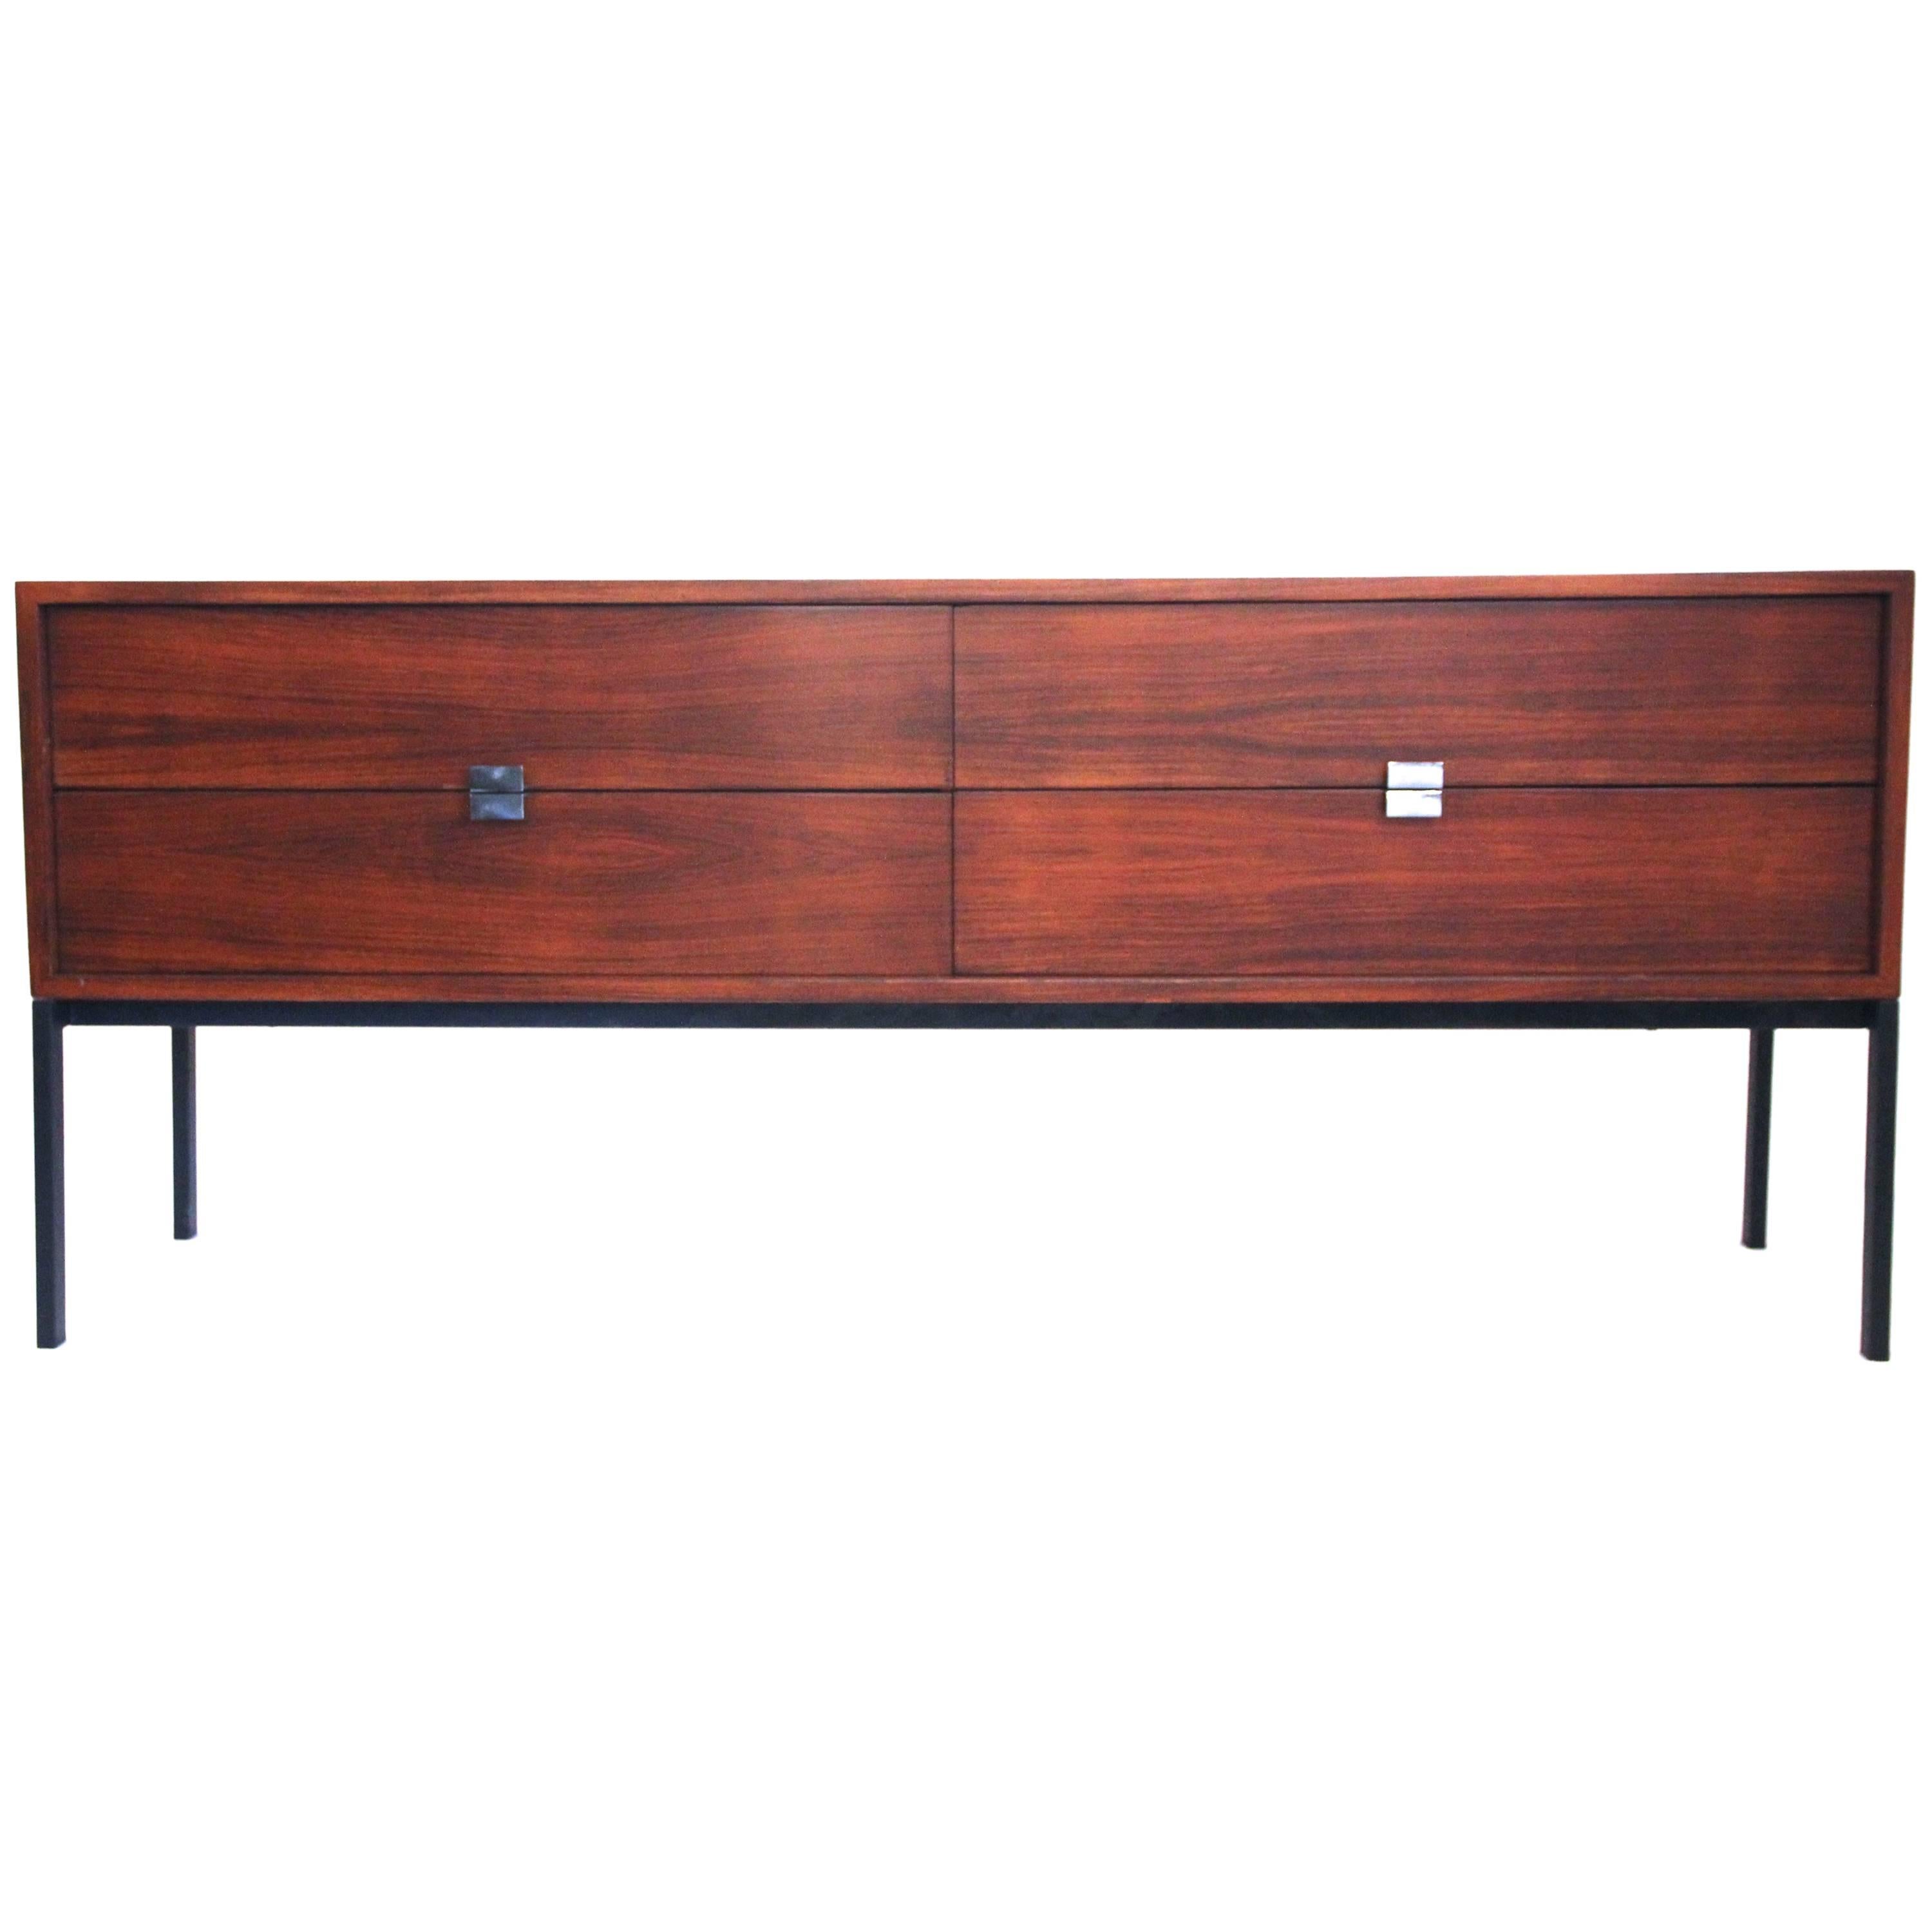 Antoine Philippon and Jacqueline Lecoq, Large Sideboard, Rosewood, circa 1965